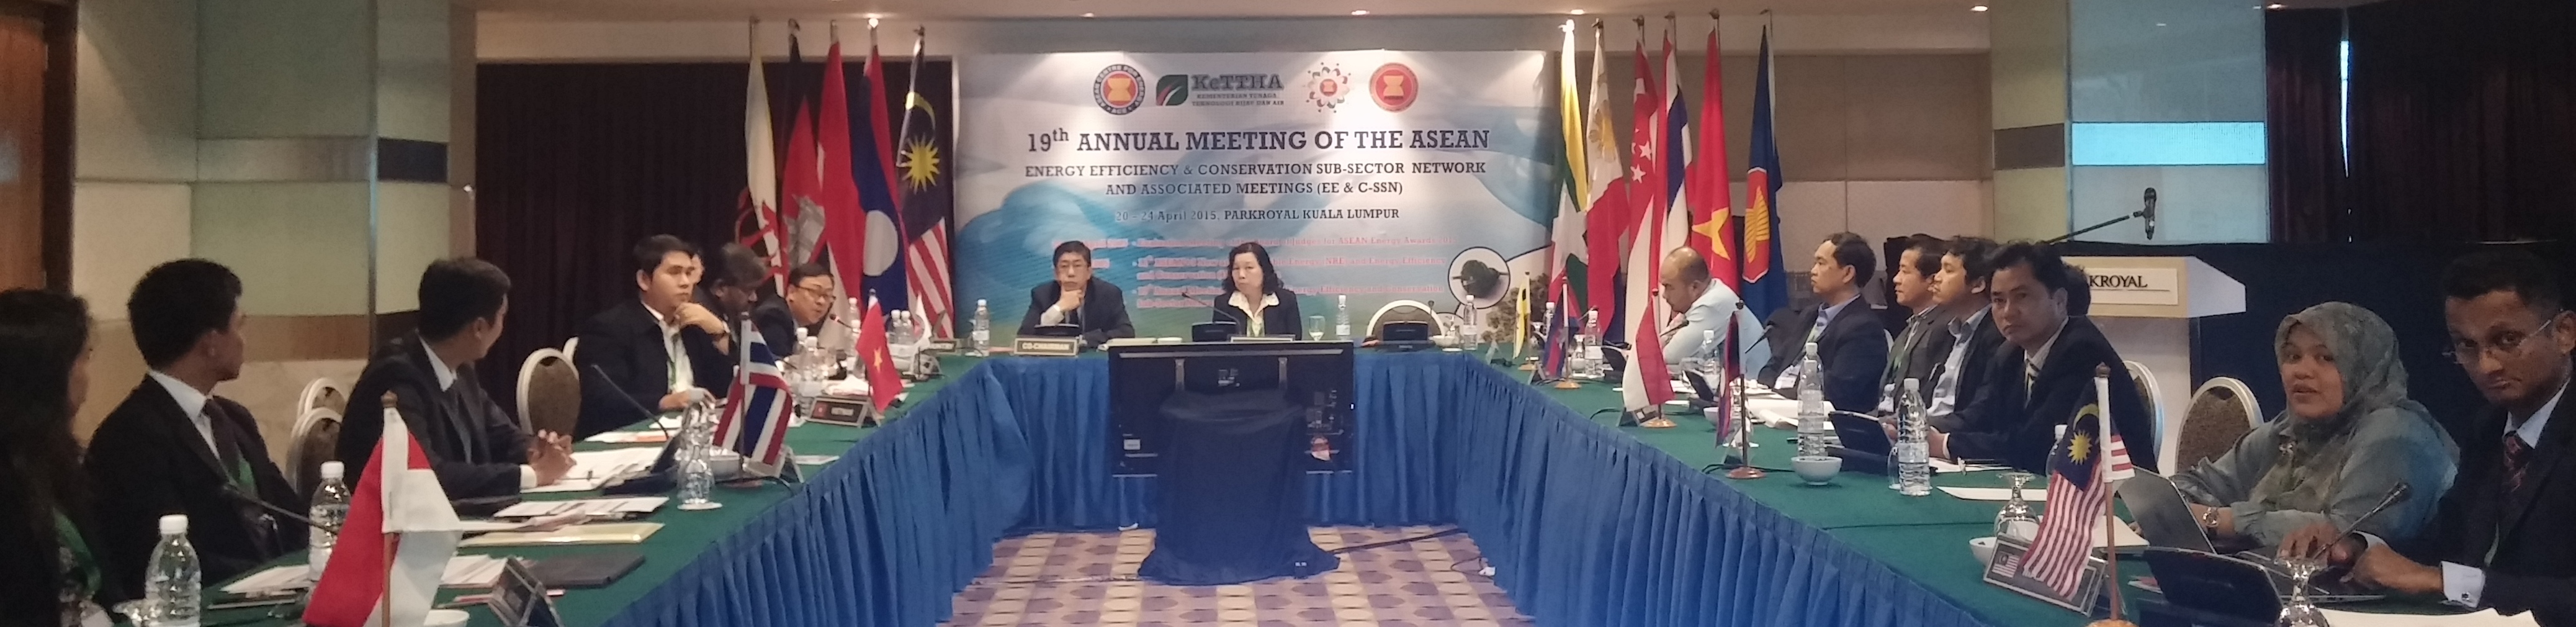 ASEAN EE&C-SSN delegates in session